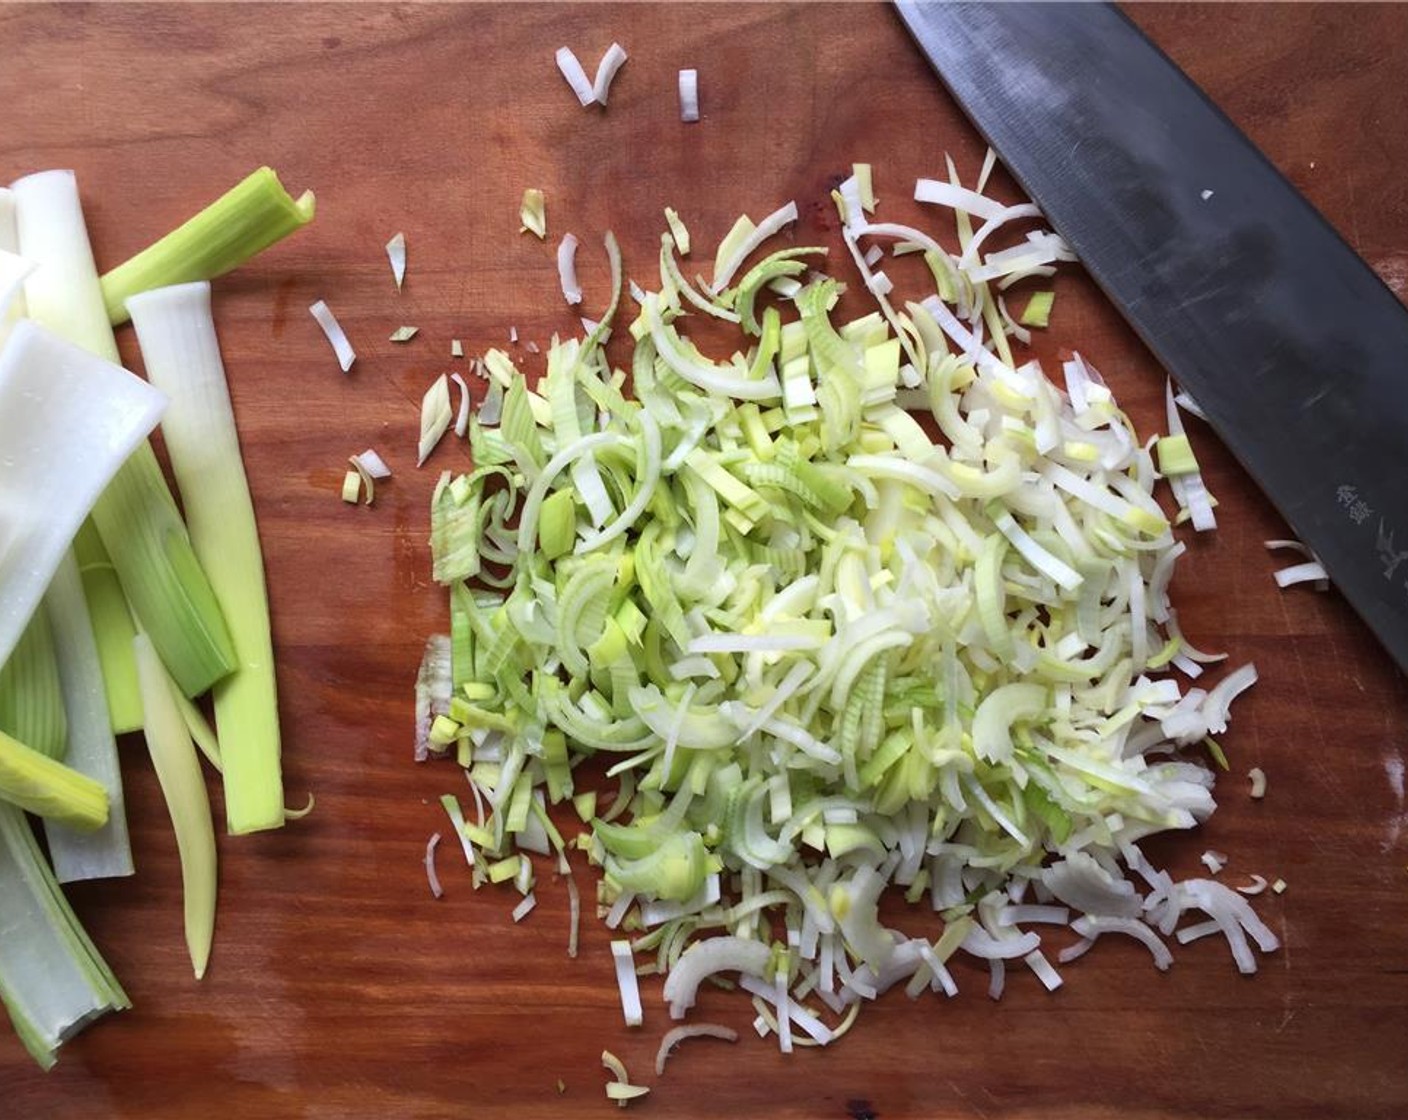 step 5 Drain and rinse the leek, and thinly slice. Set aside.